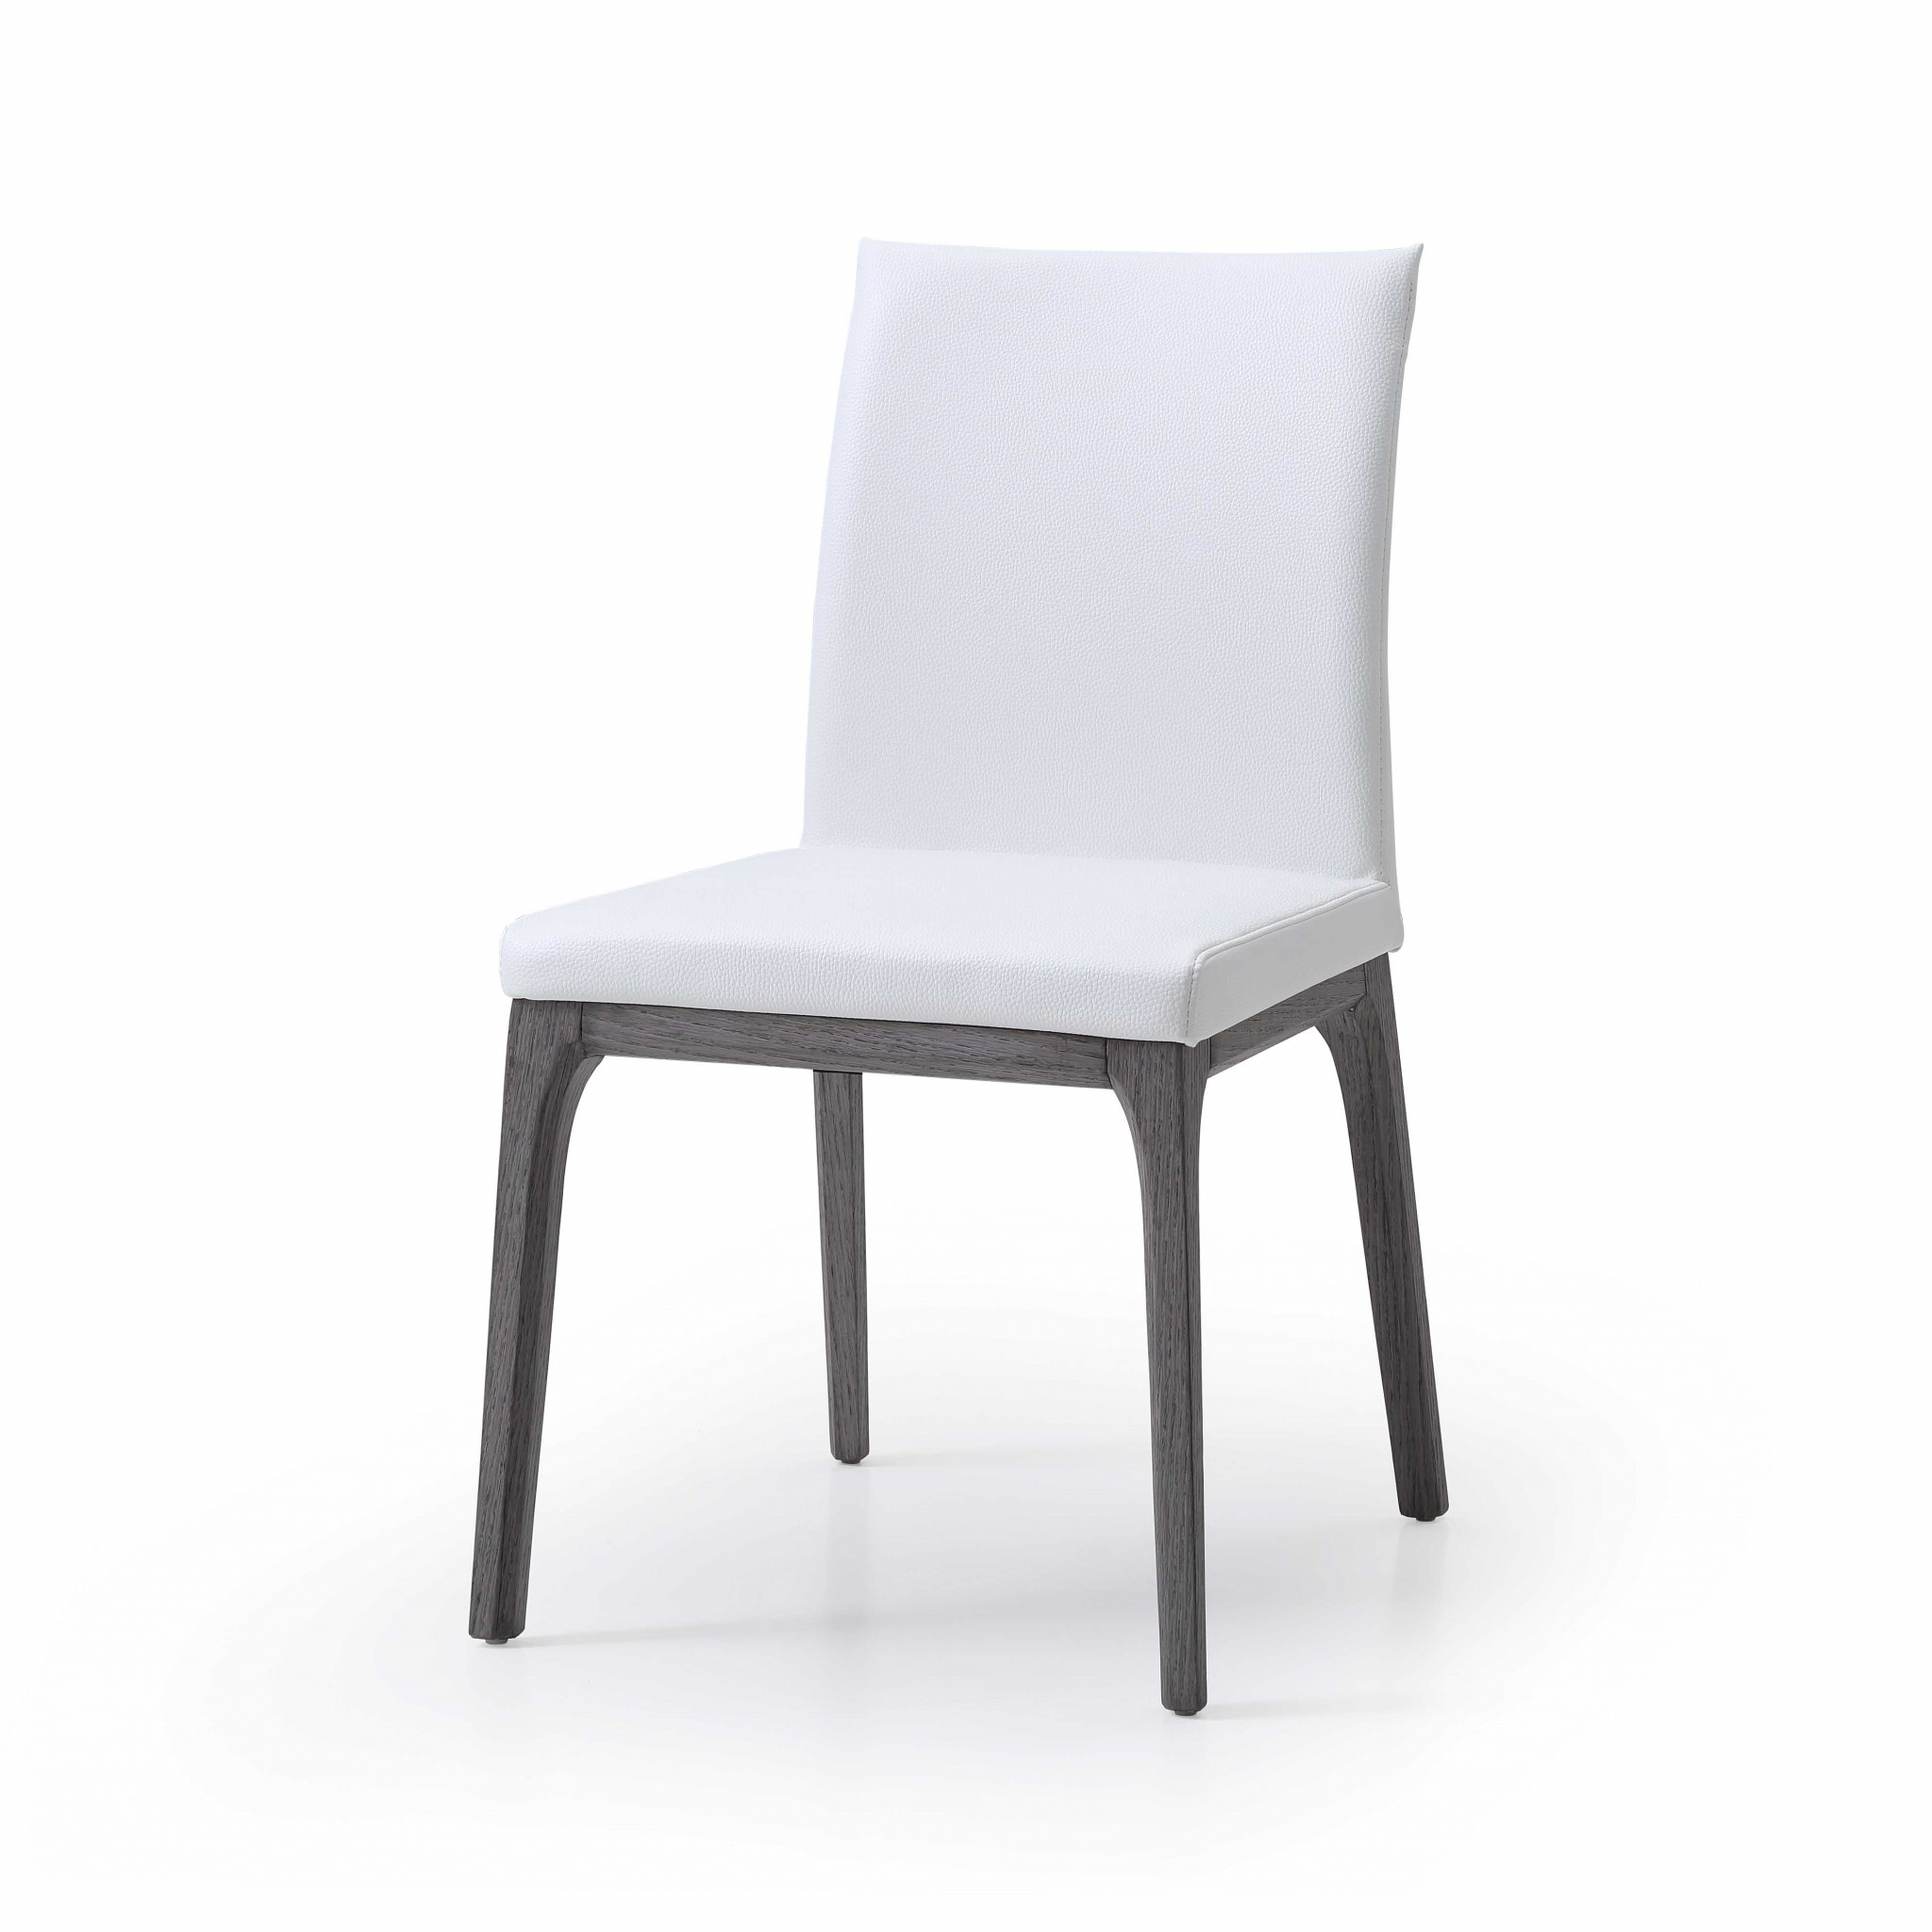 20" X 23" X 35" White Faux Leather or Metal Dining Chair